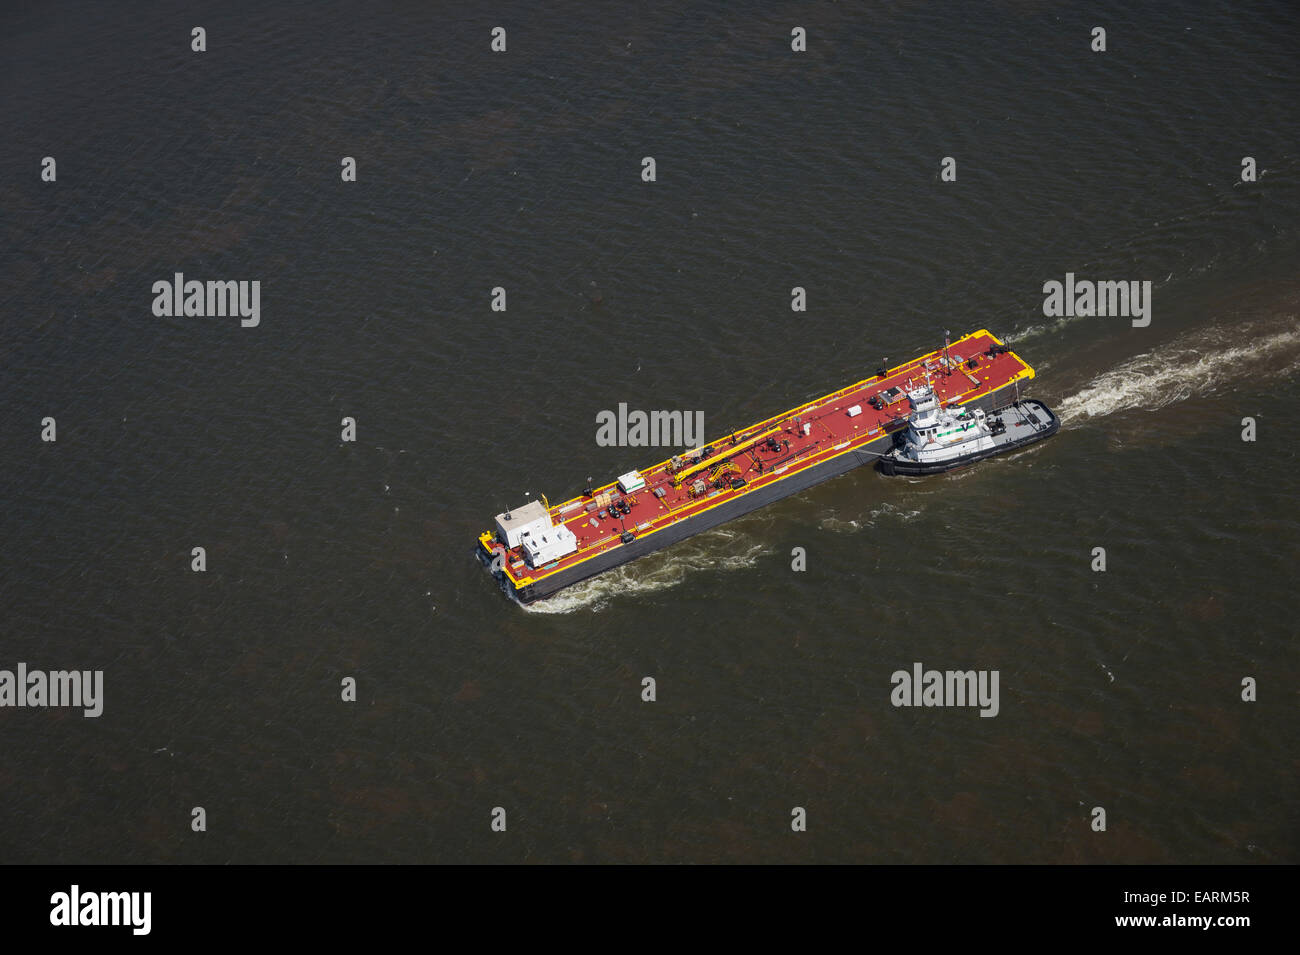 Aerial View Of Tug Boat Guiding Utility Barge Down River Stock Photo